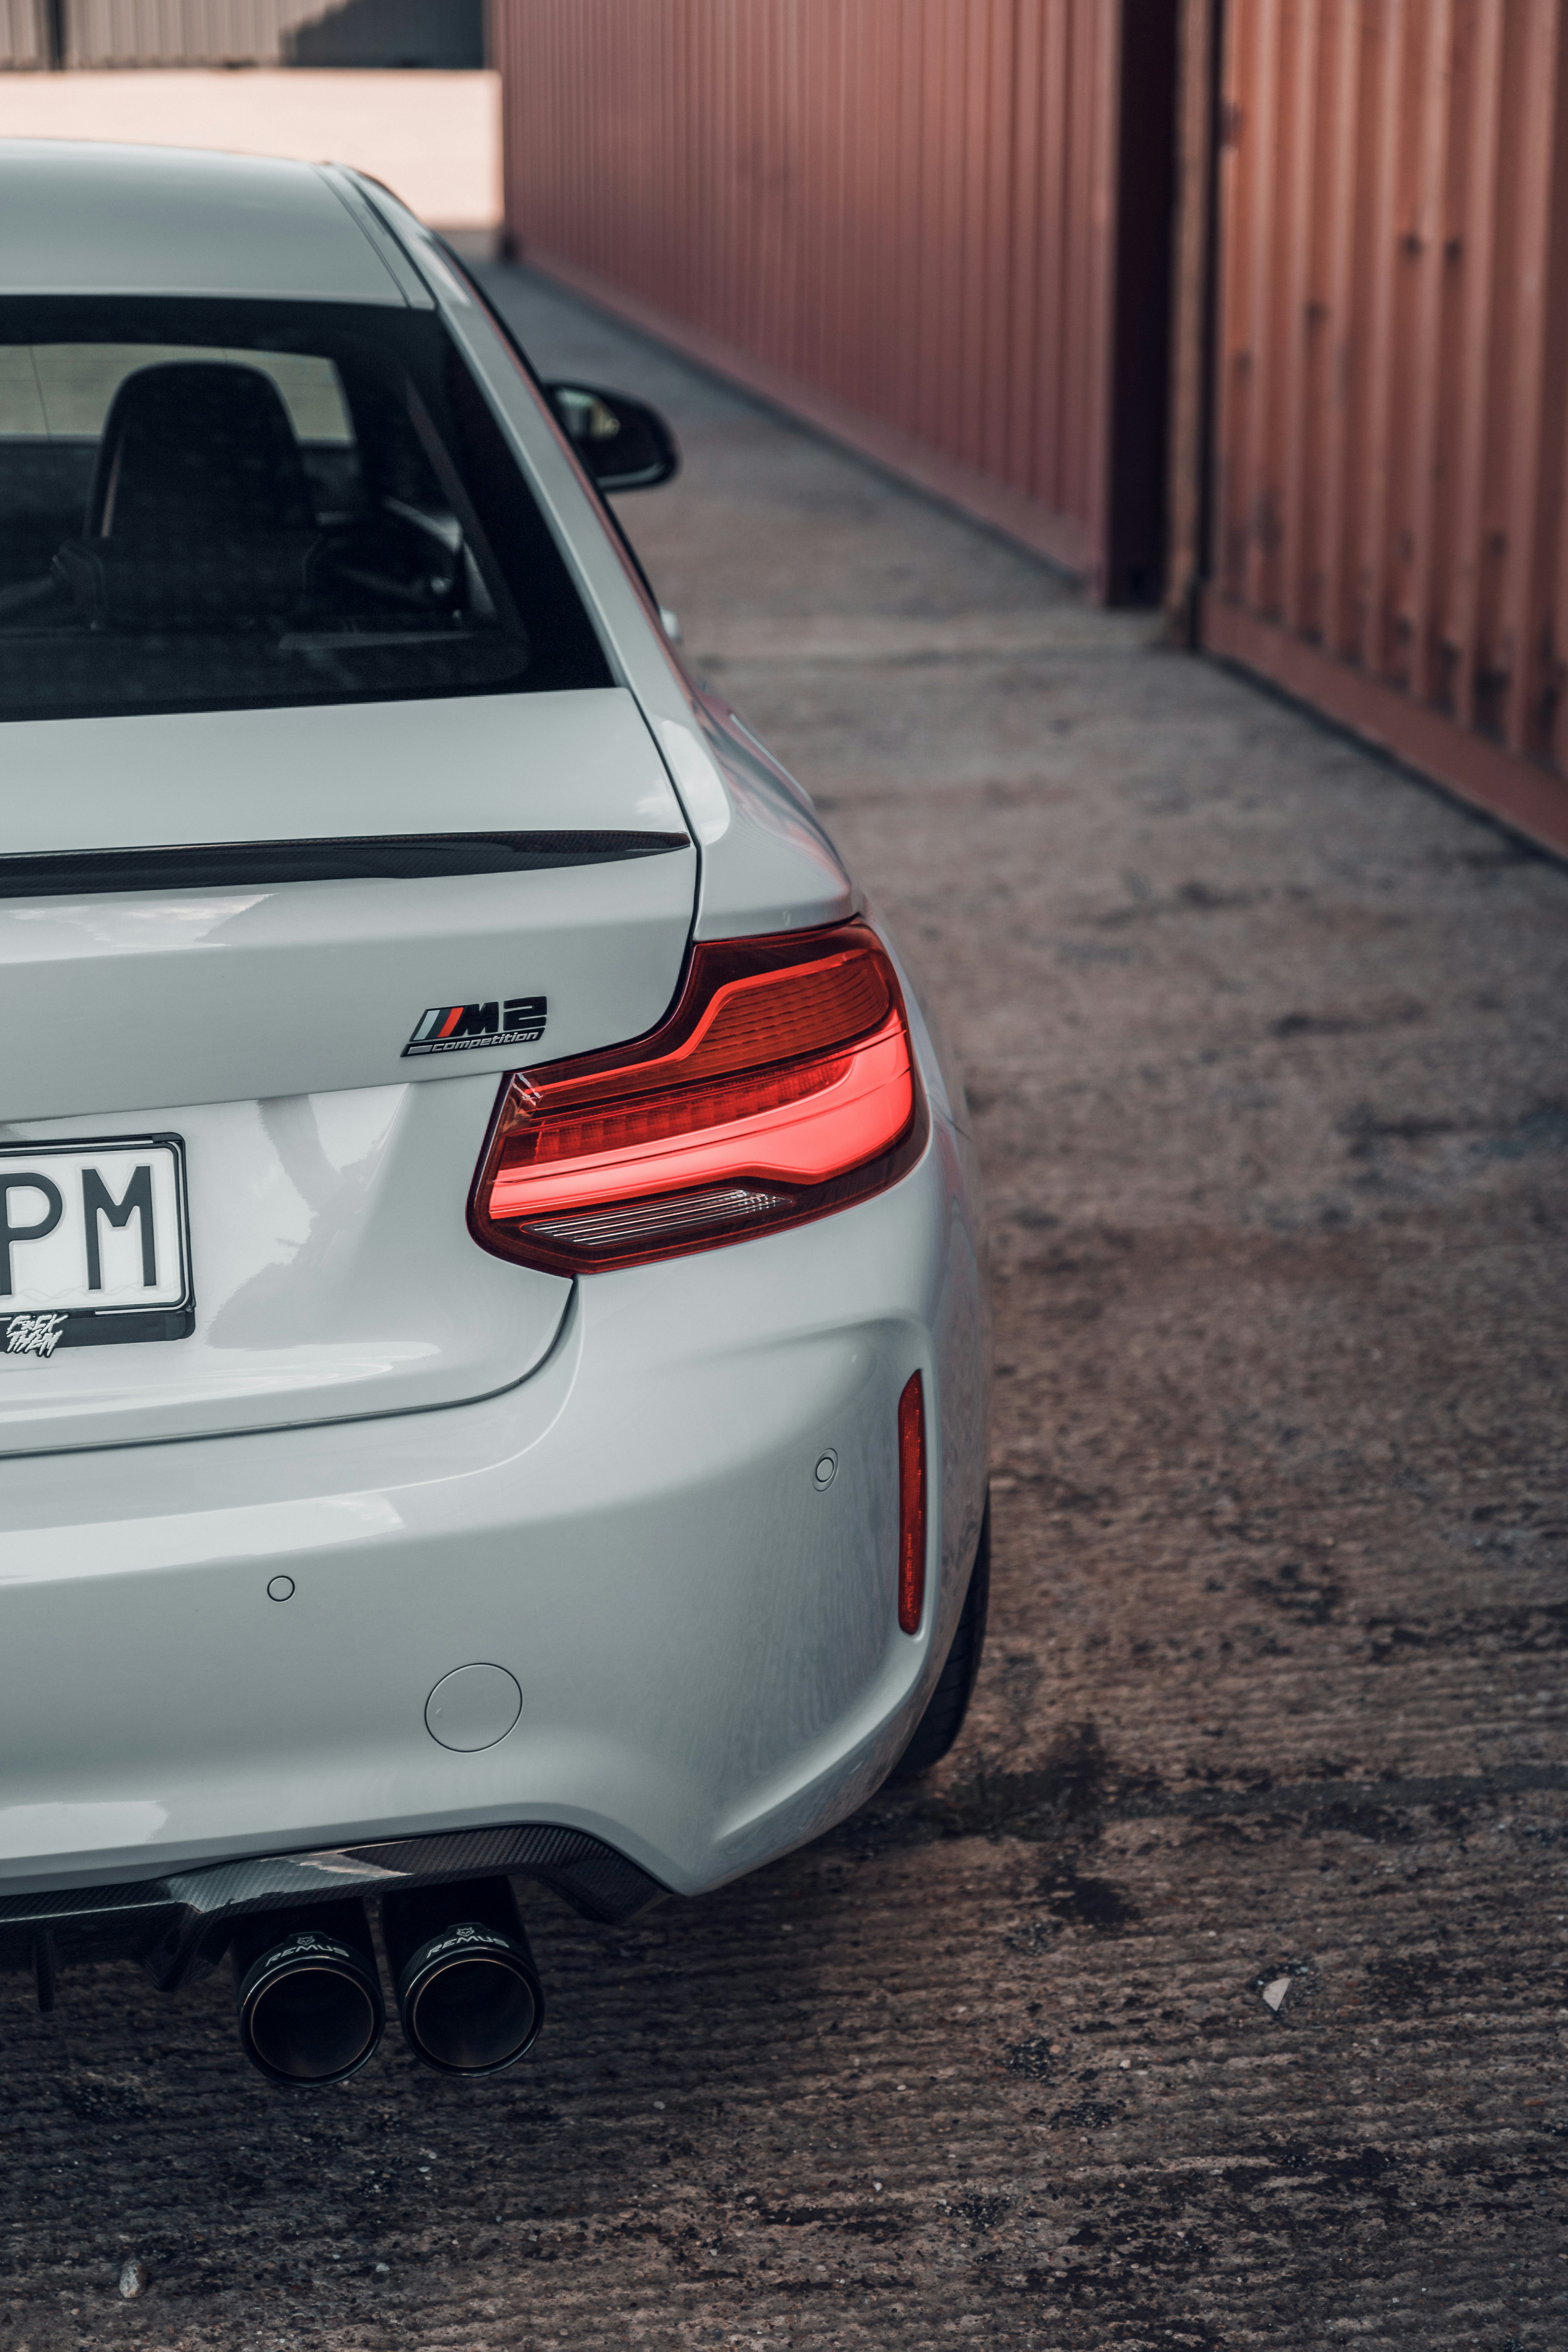 silver bmw m 3 parked on road side during daytime